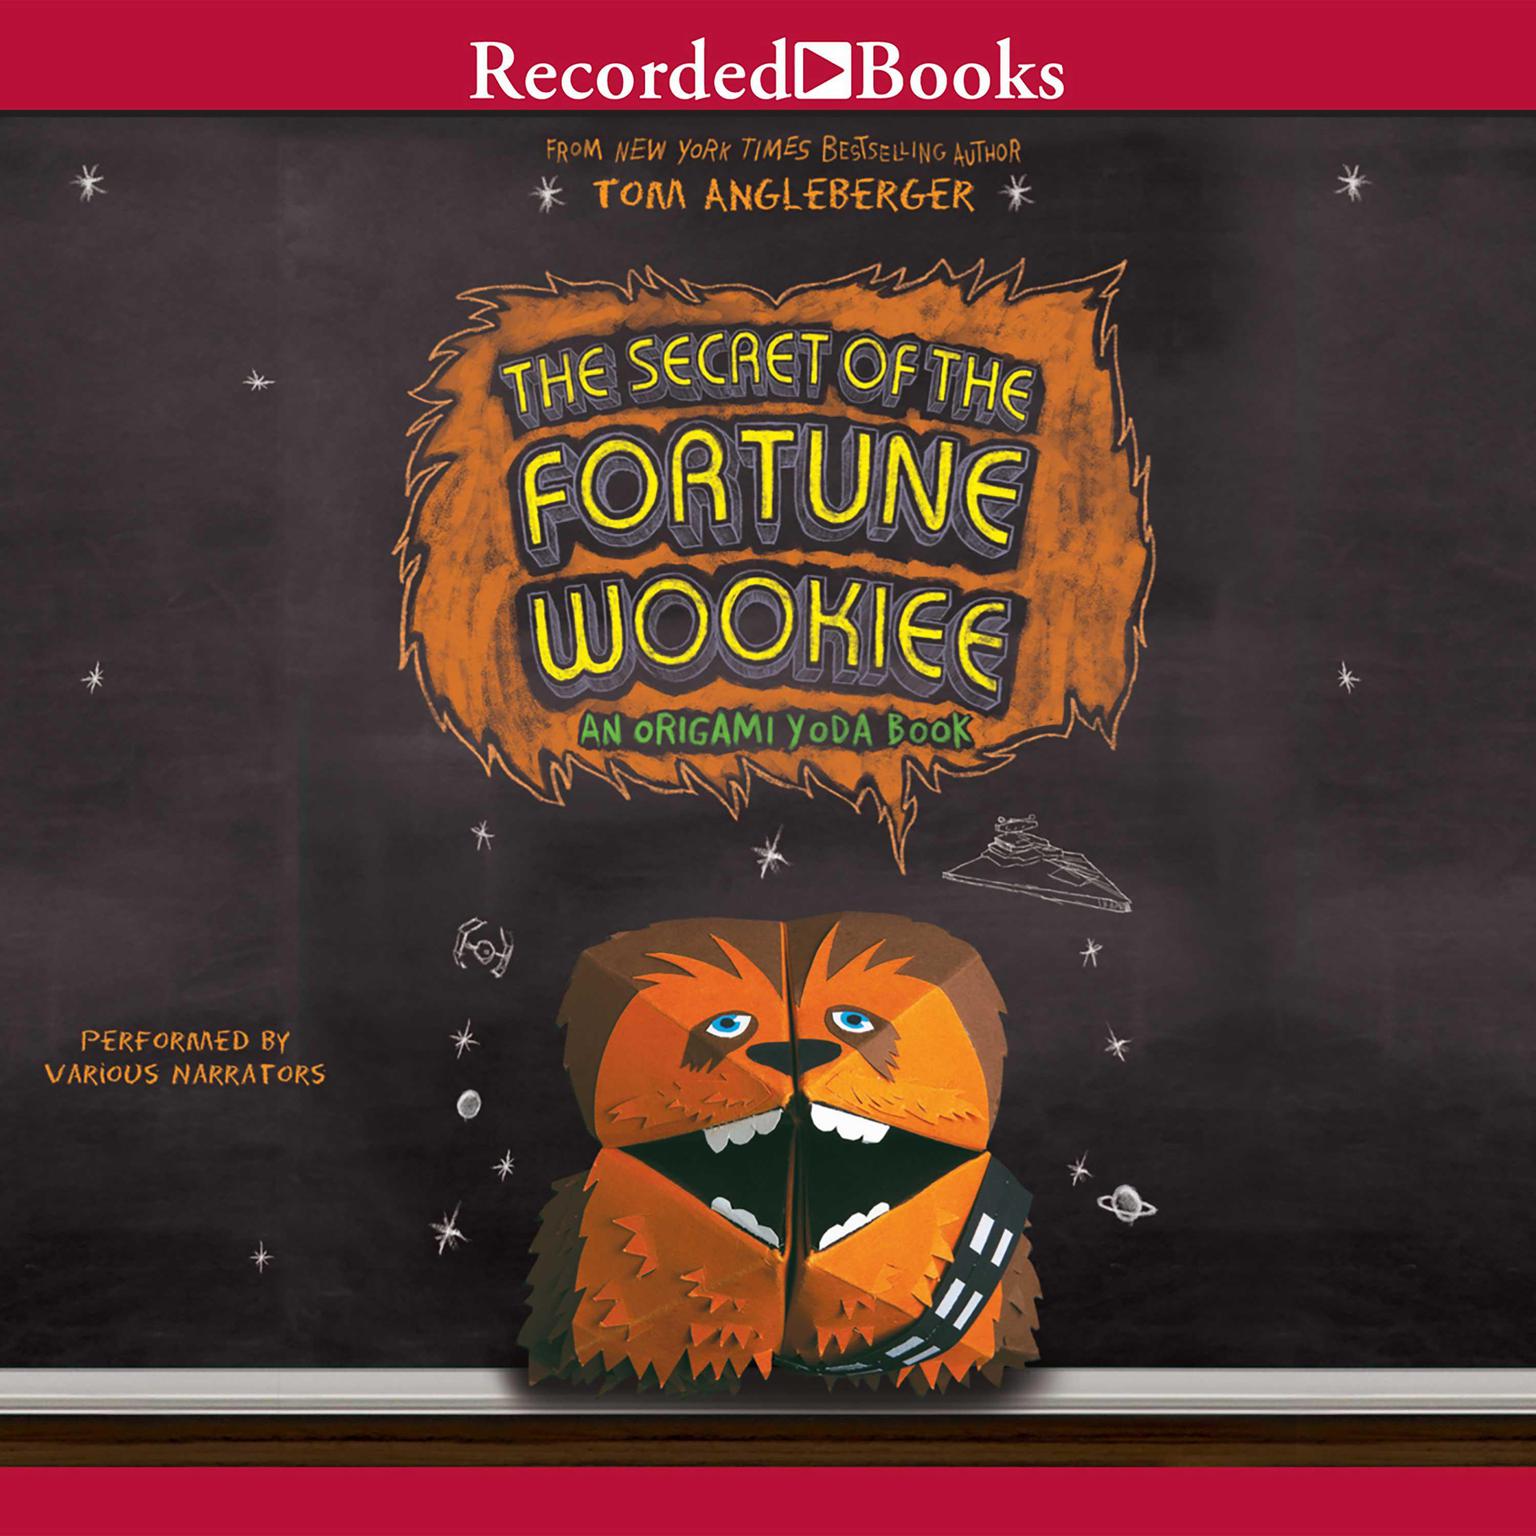 The Secret of the Fortune Wookiee: An Origami Yoda Book Audiobook, by Tom Angleberger